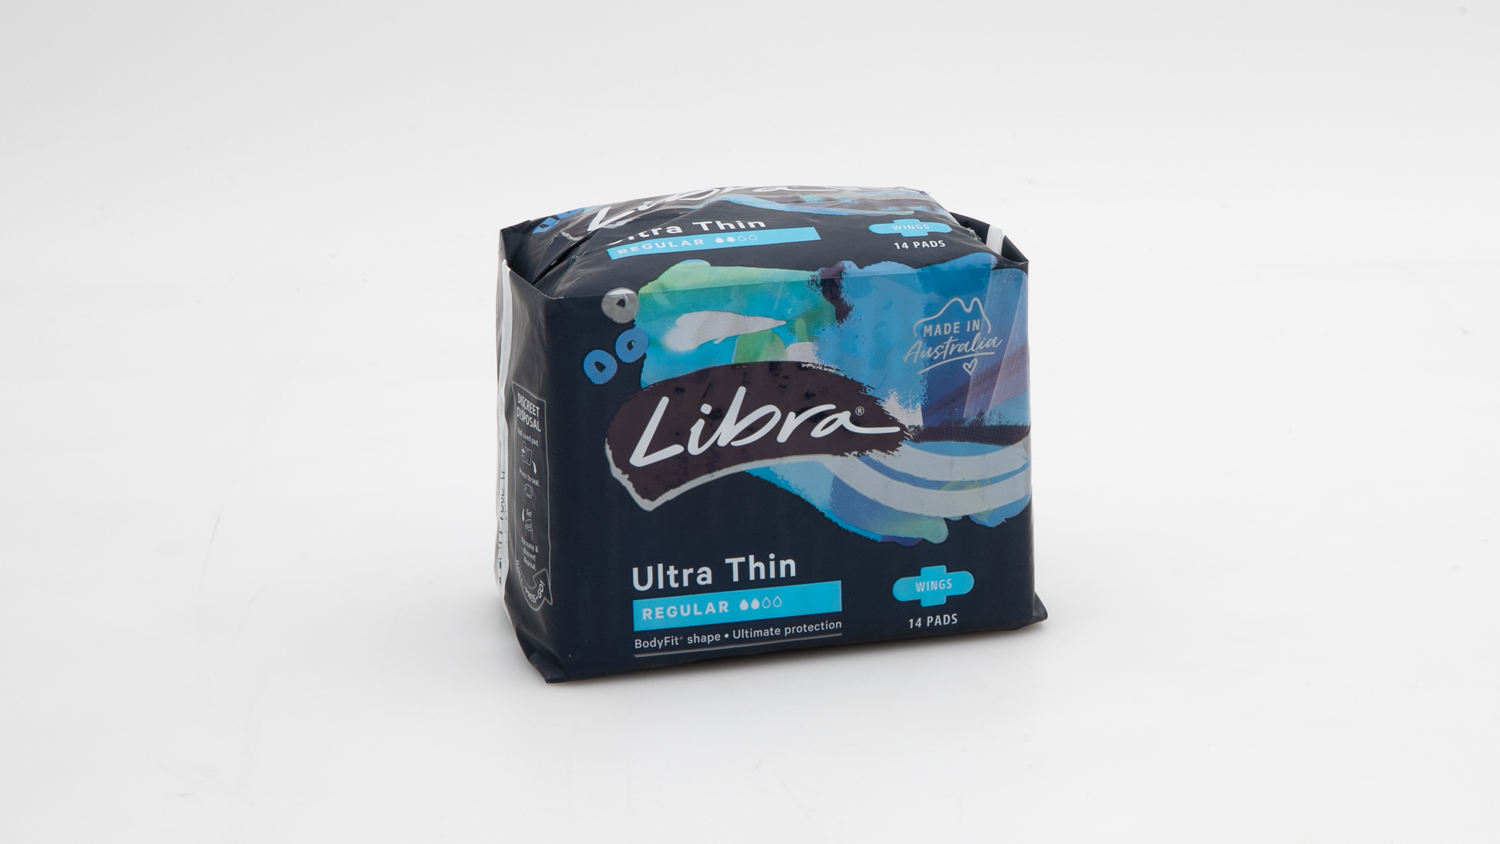 Libra Ultra Thin Regular with wings carousel image